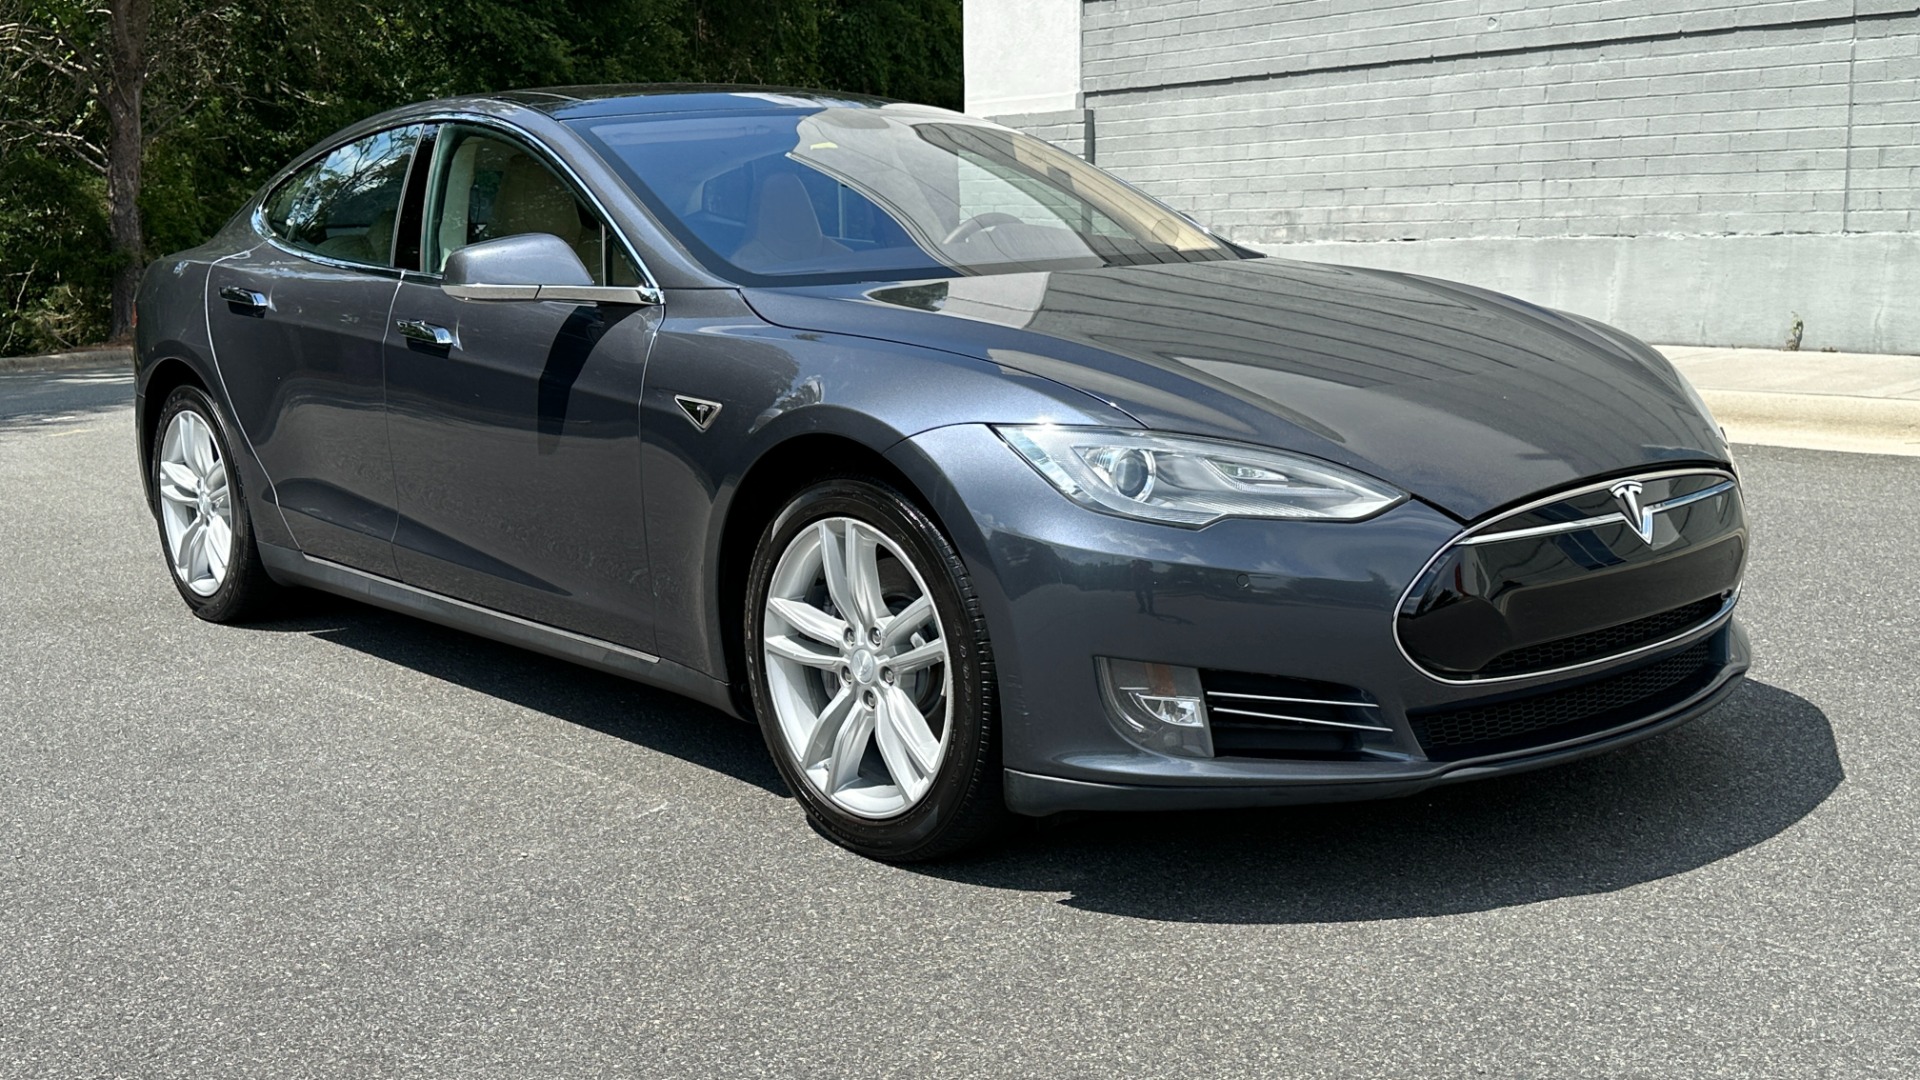 Used 2014 Tesla Model S 60 kWh Battery / 60D / PREMIUM CONNECTIVITY / LEATHER / SUNROOF for sale $22,995 at Formula Imports in Charlotte NC 28227 7